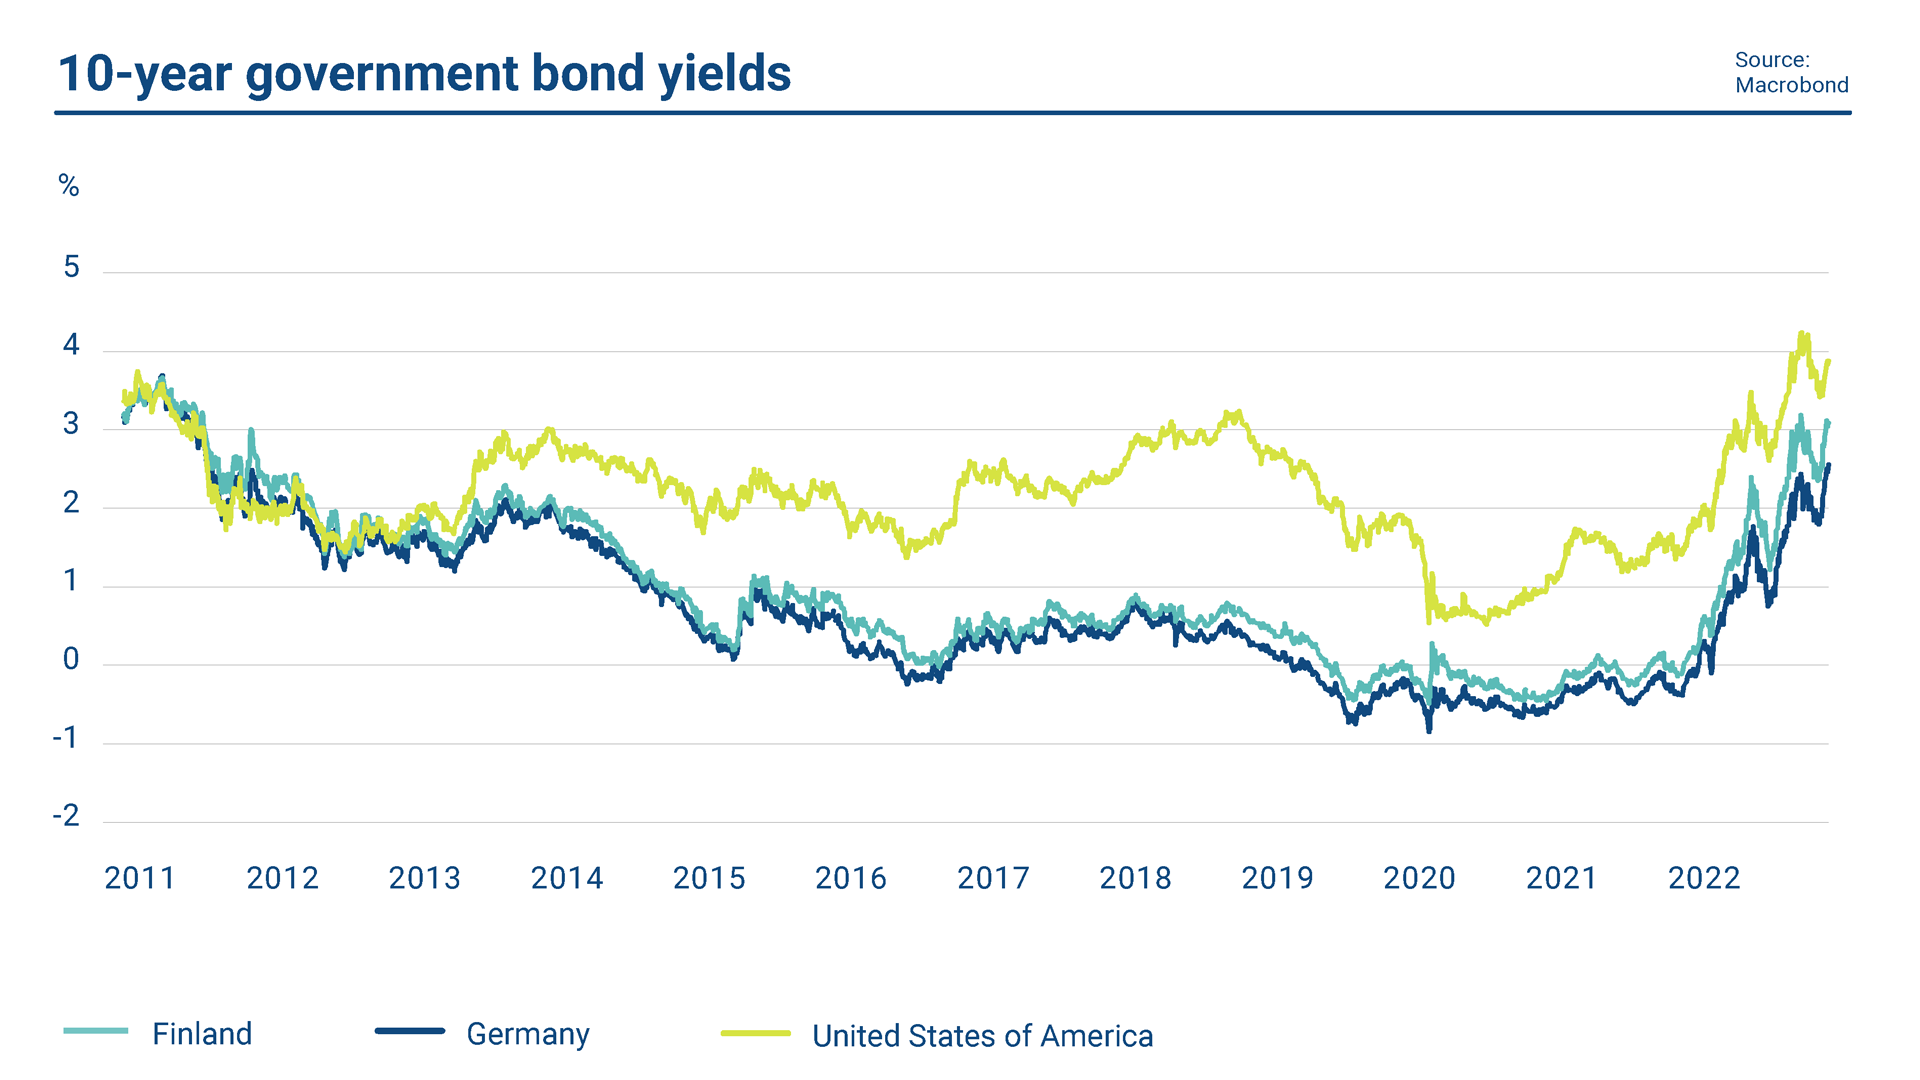 The graph shows the 10-year government bond yields of Germany, Finland and the United States in 2011-22.